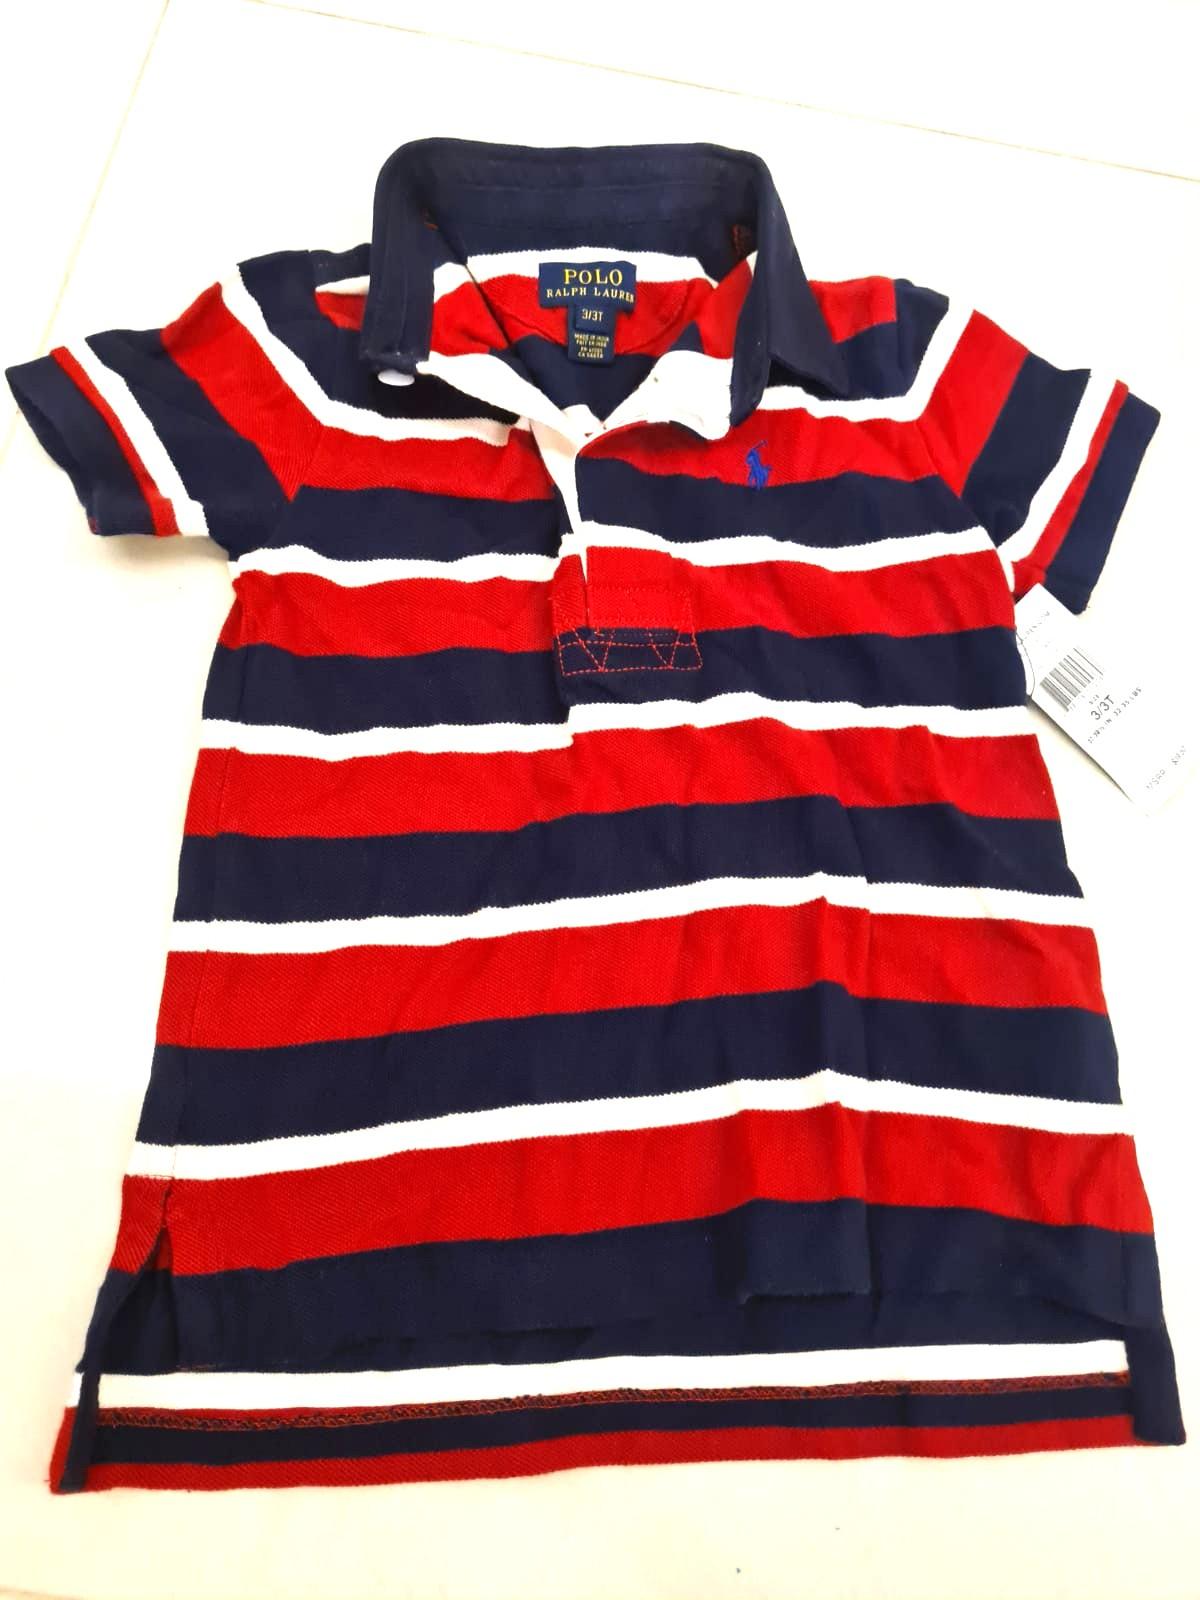 100% Authentic and Brand New Ralph Lauren Polo T Shirt - 3T, Babies & Kids,  Babies & Kids Fashion on Carousell